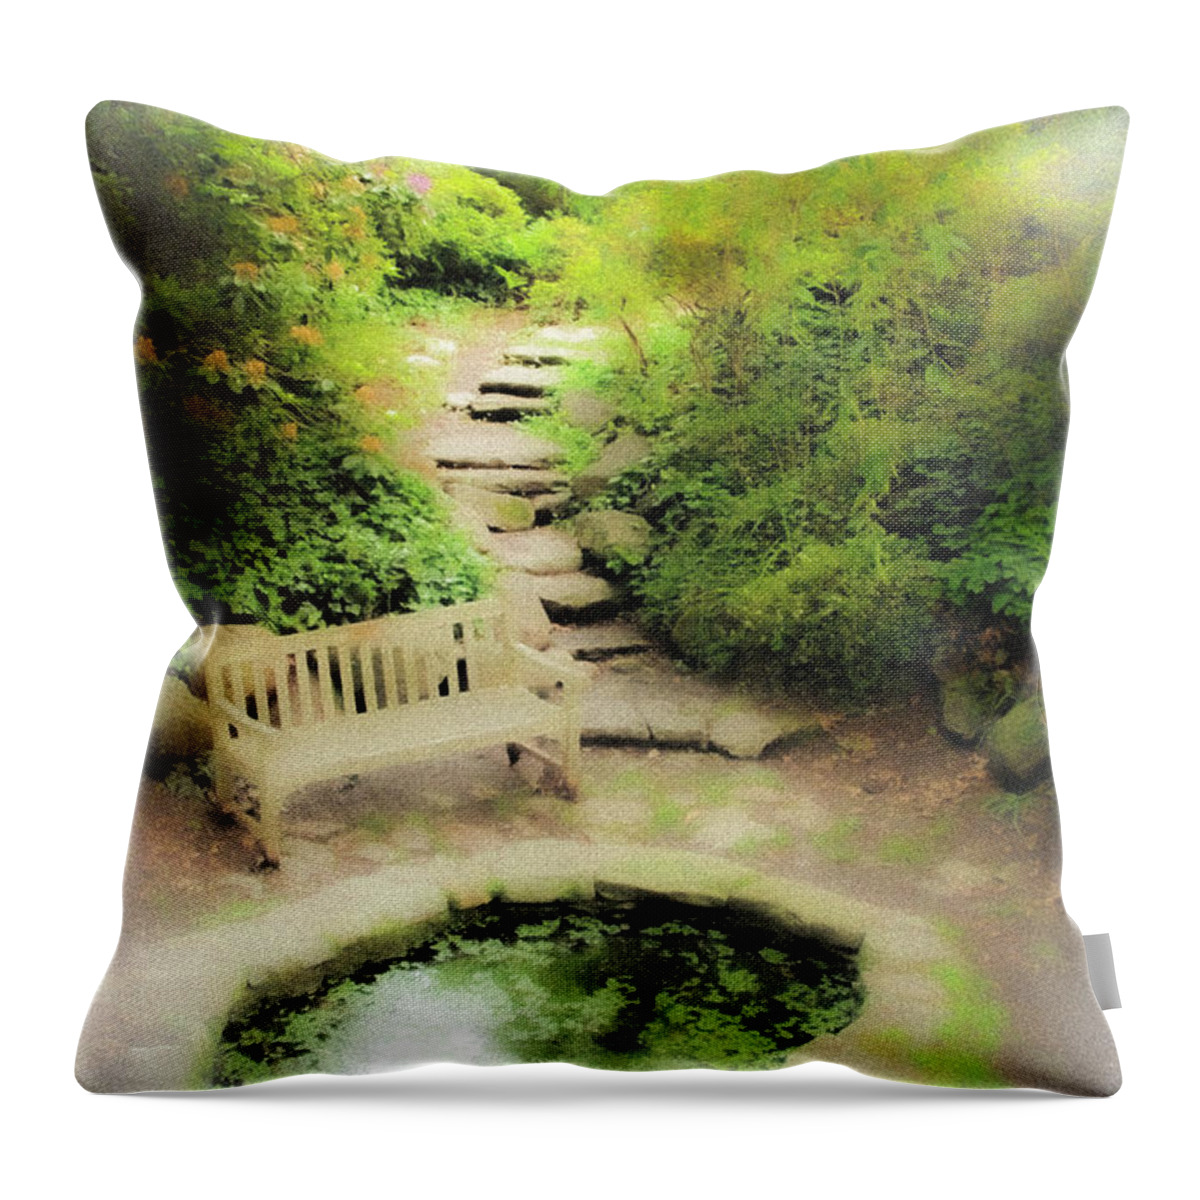 Pond Water Bench Stone Steps Fog Throw Pillow featuring the photograph Hazy Pond by John Linnemeyer